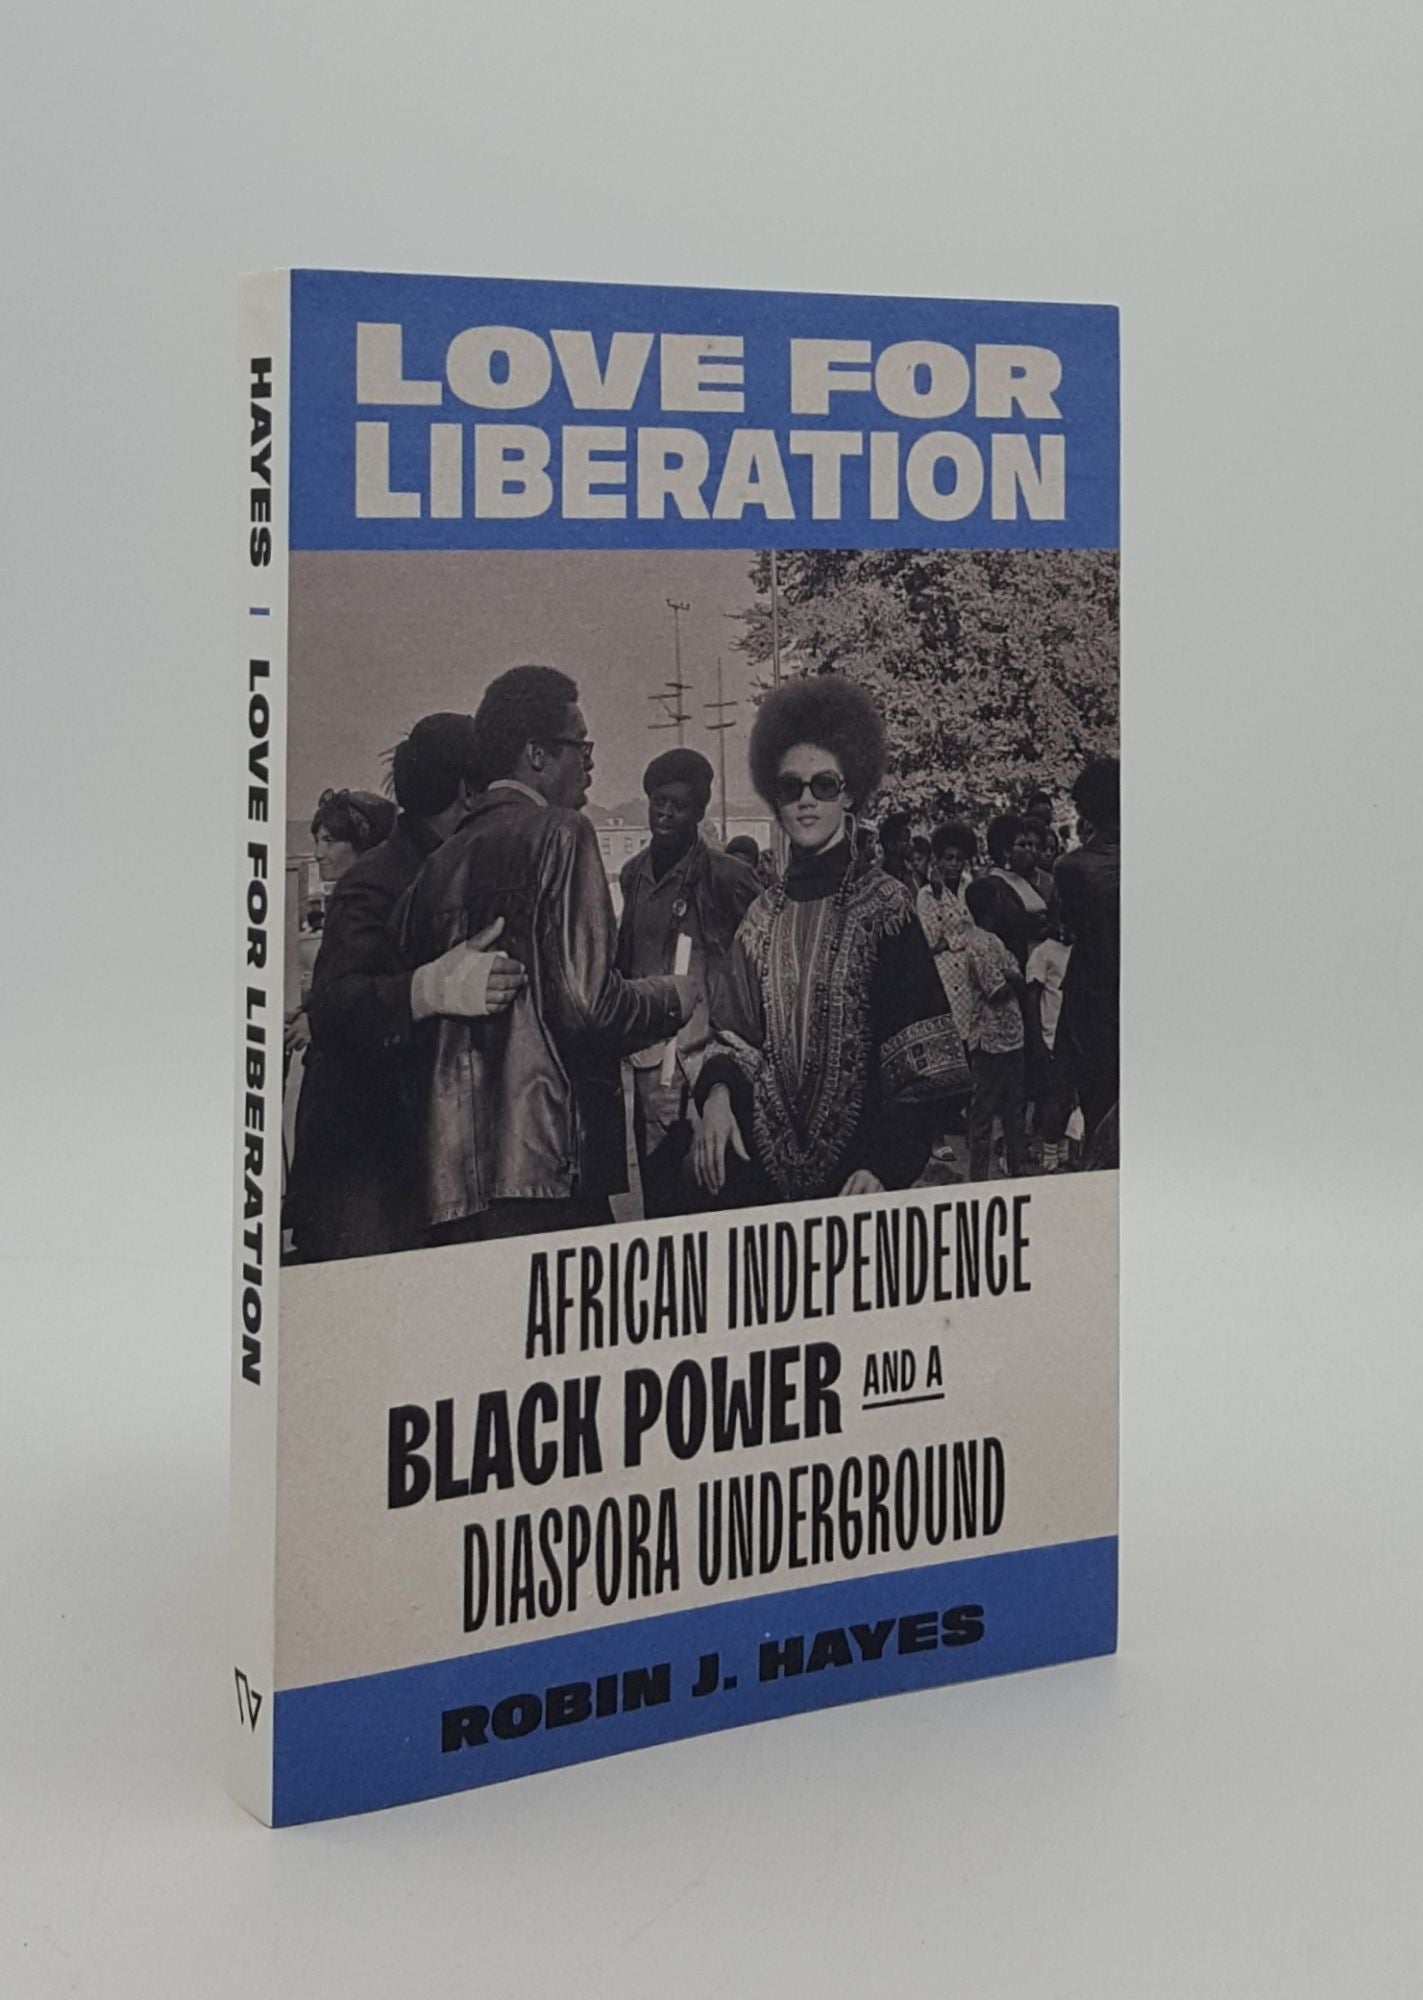 HAYES Robin J. - Love for Liberation African Independence Black Power and a Diaspora Underground